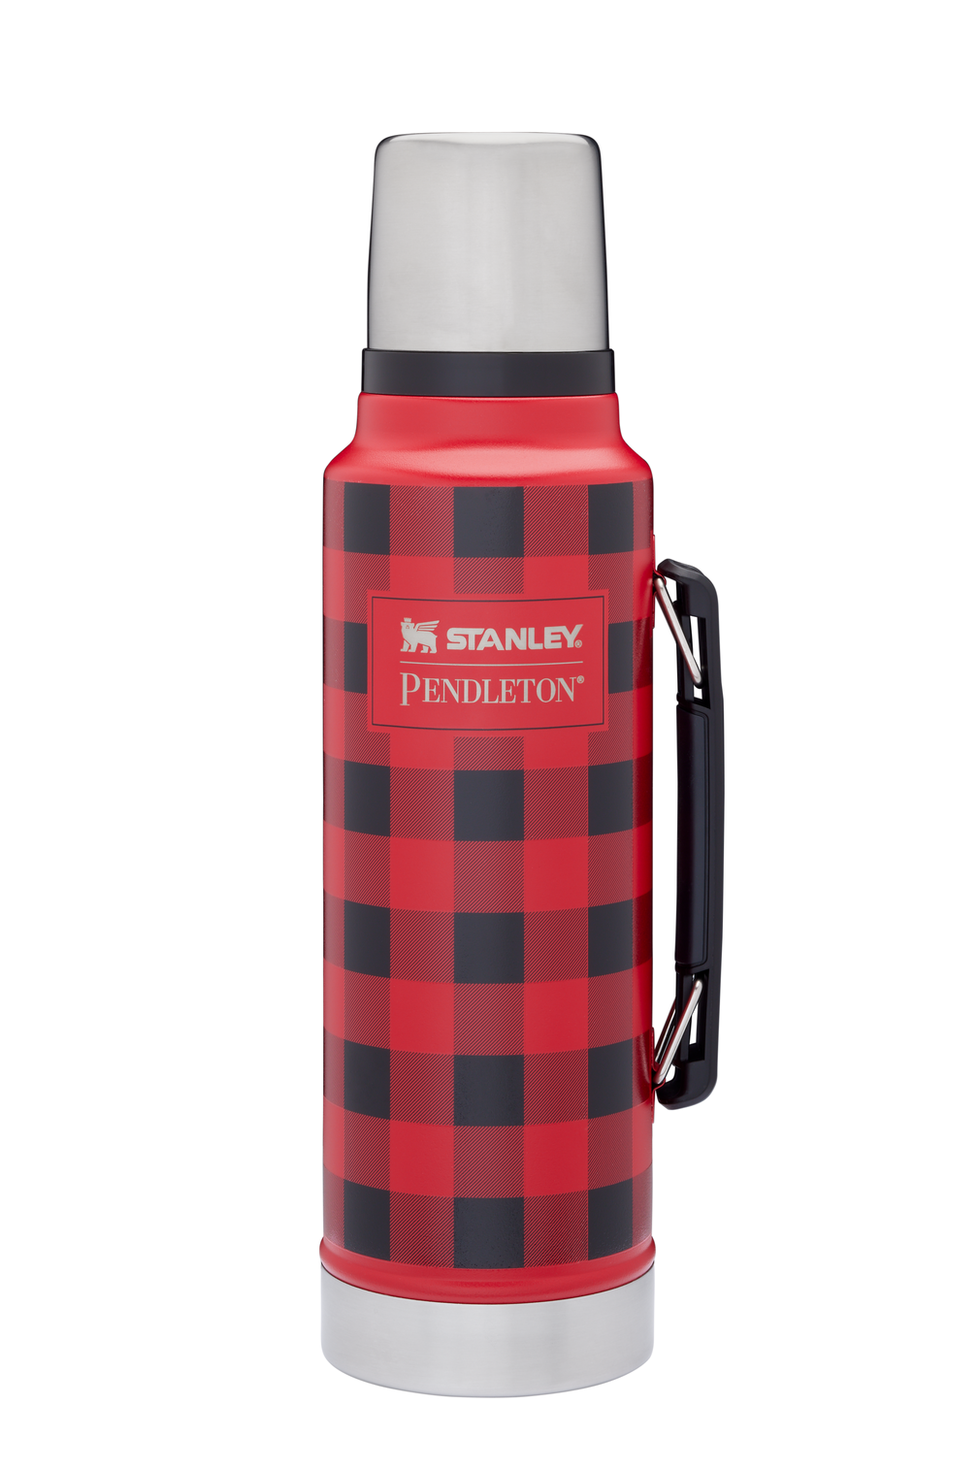 https://hips.hearstapps.com/vader-prod.s3.amazonaws.com/1701191547-B2B_Web_PNG-Stanley-X-Pendleton-Vacuum-Bottle-Buffalo-Check-Red-1-5qt.png?crop=0.792xw:1xh;center,top&resize=980:*